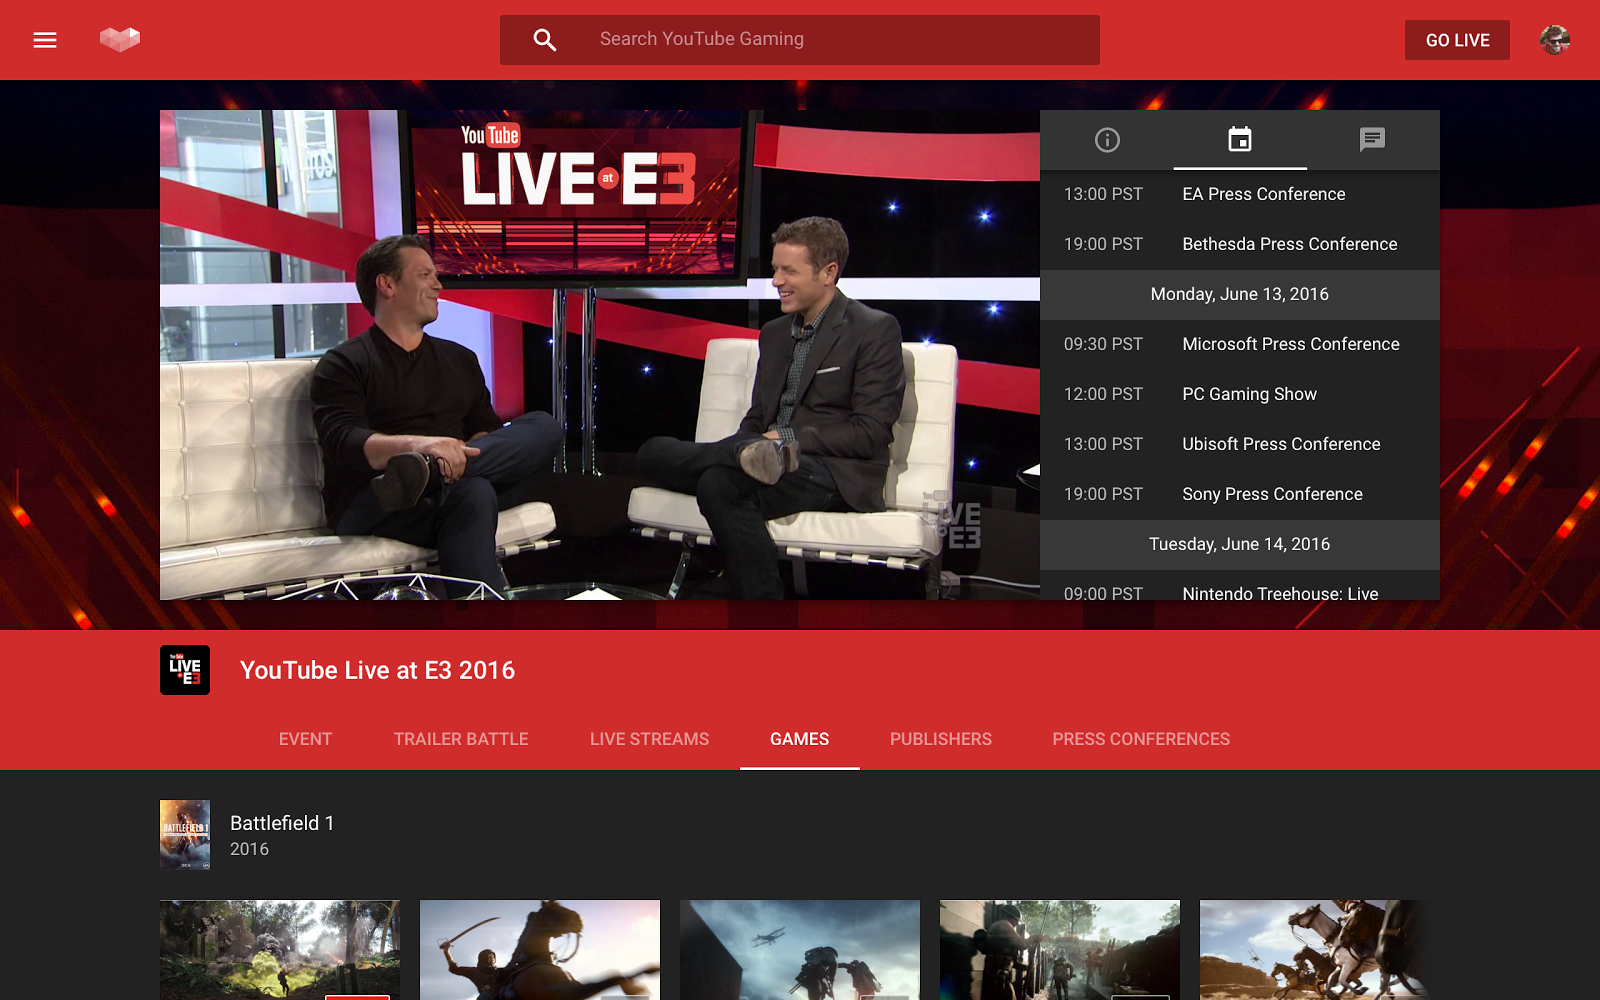 Image for YouTube Gaming's E3 show to return with Geoff Keighley as host